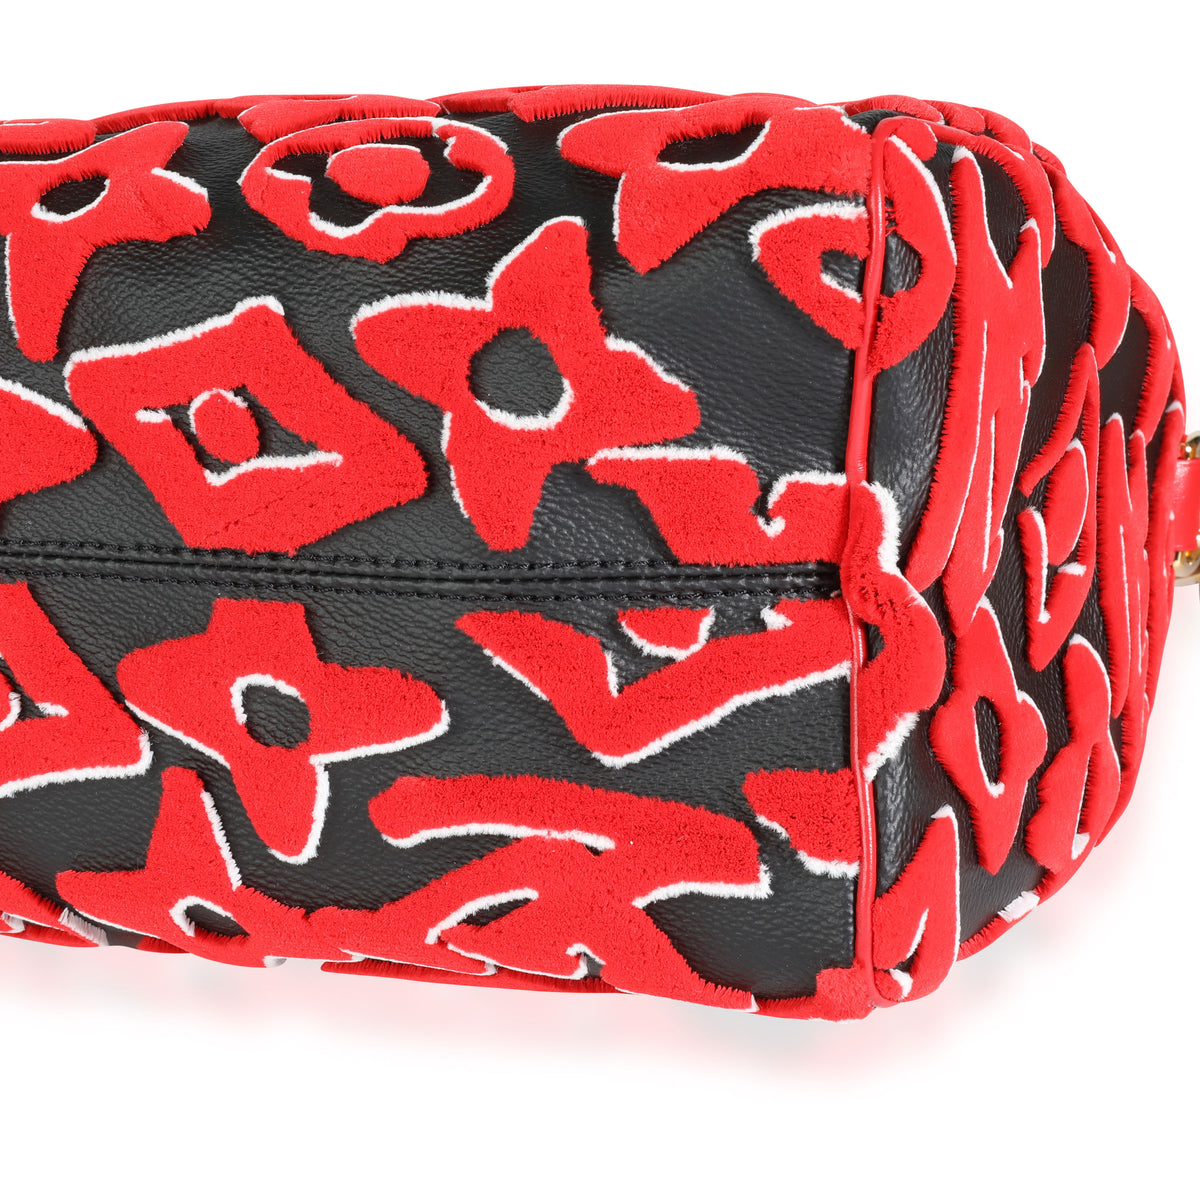 Louis Vuitton x Urs Fischer Limited Black and Red Tufted Monogram